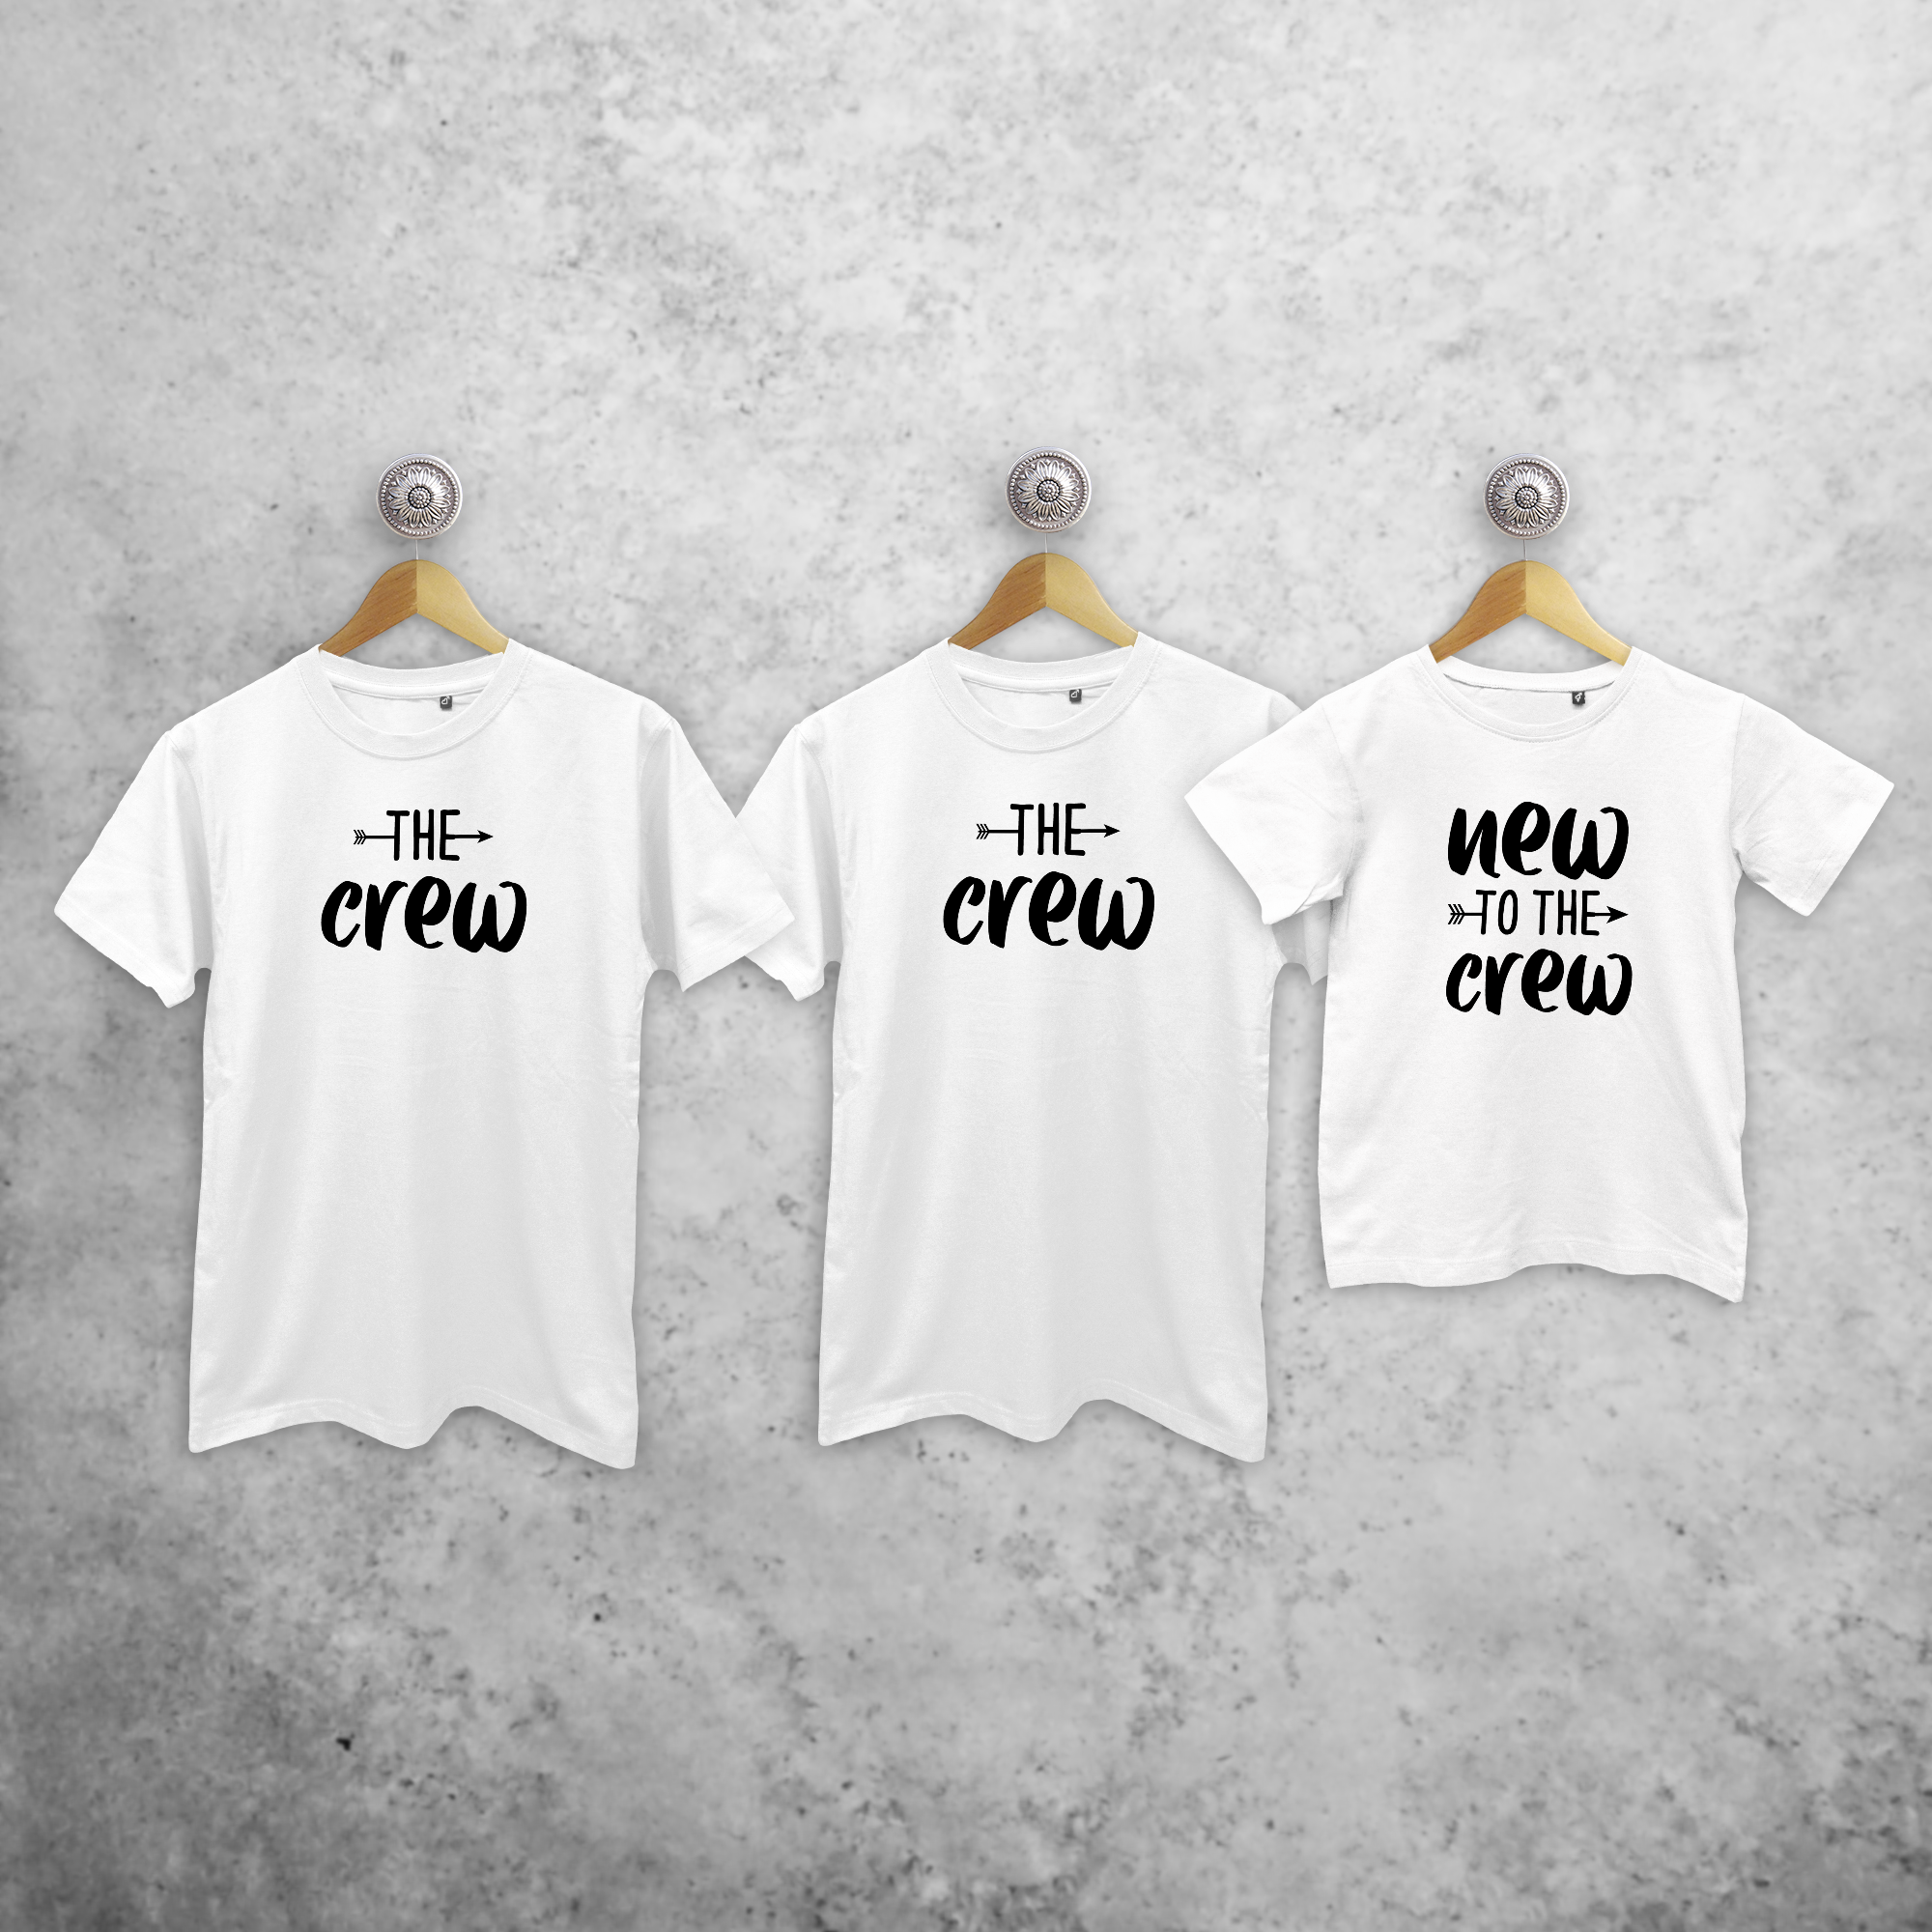 The crew', 'The crew' & 'New to the crew' matchende shirts